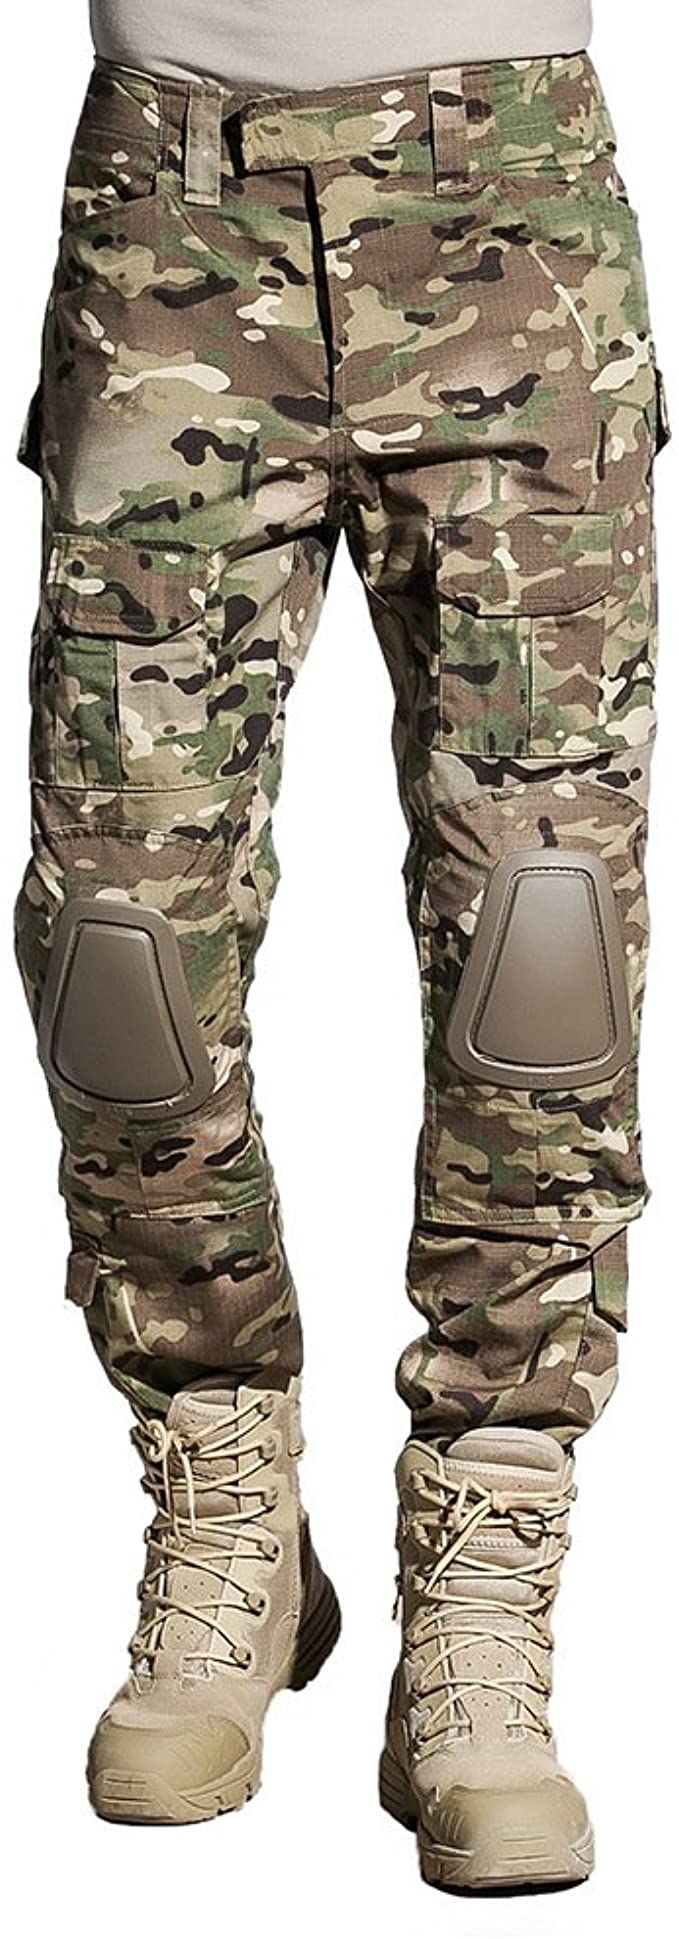 Tactical Pants With Knee Pads of the decade Learn more here!